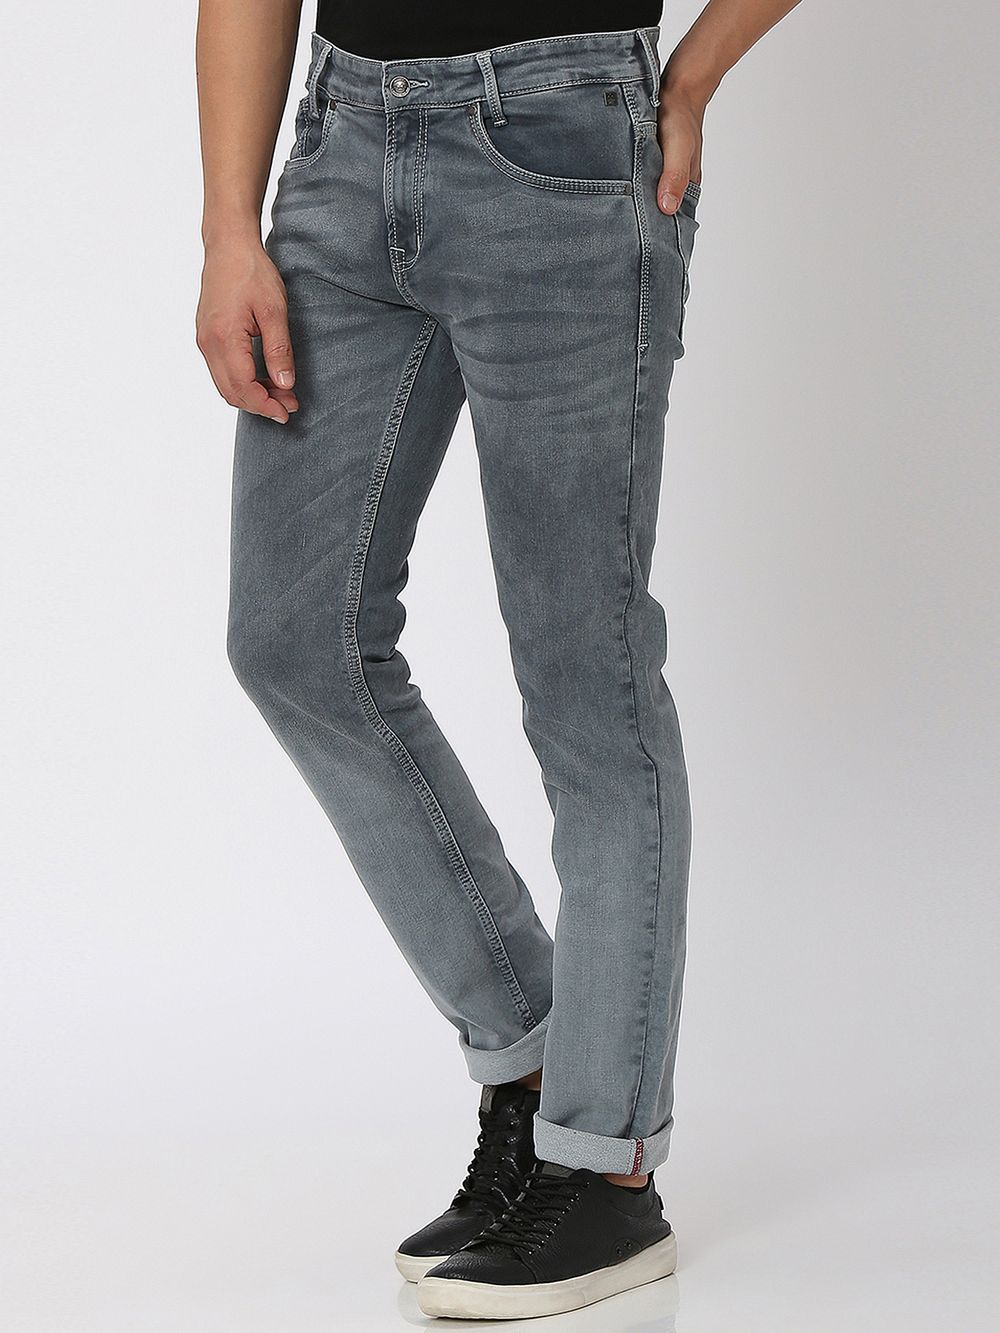 Grey Narrow Fit Denim Deluxe Stretch Jeans